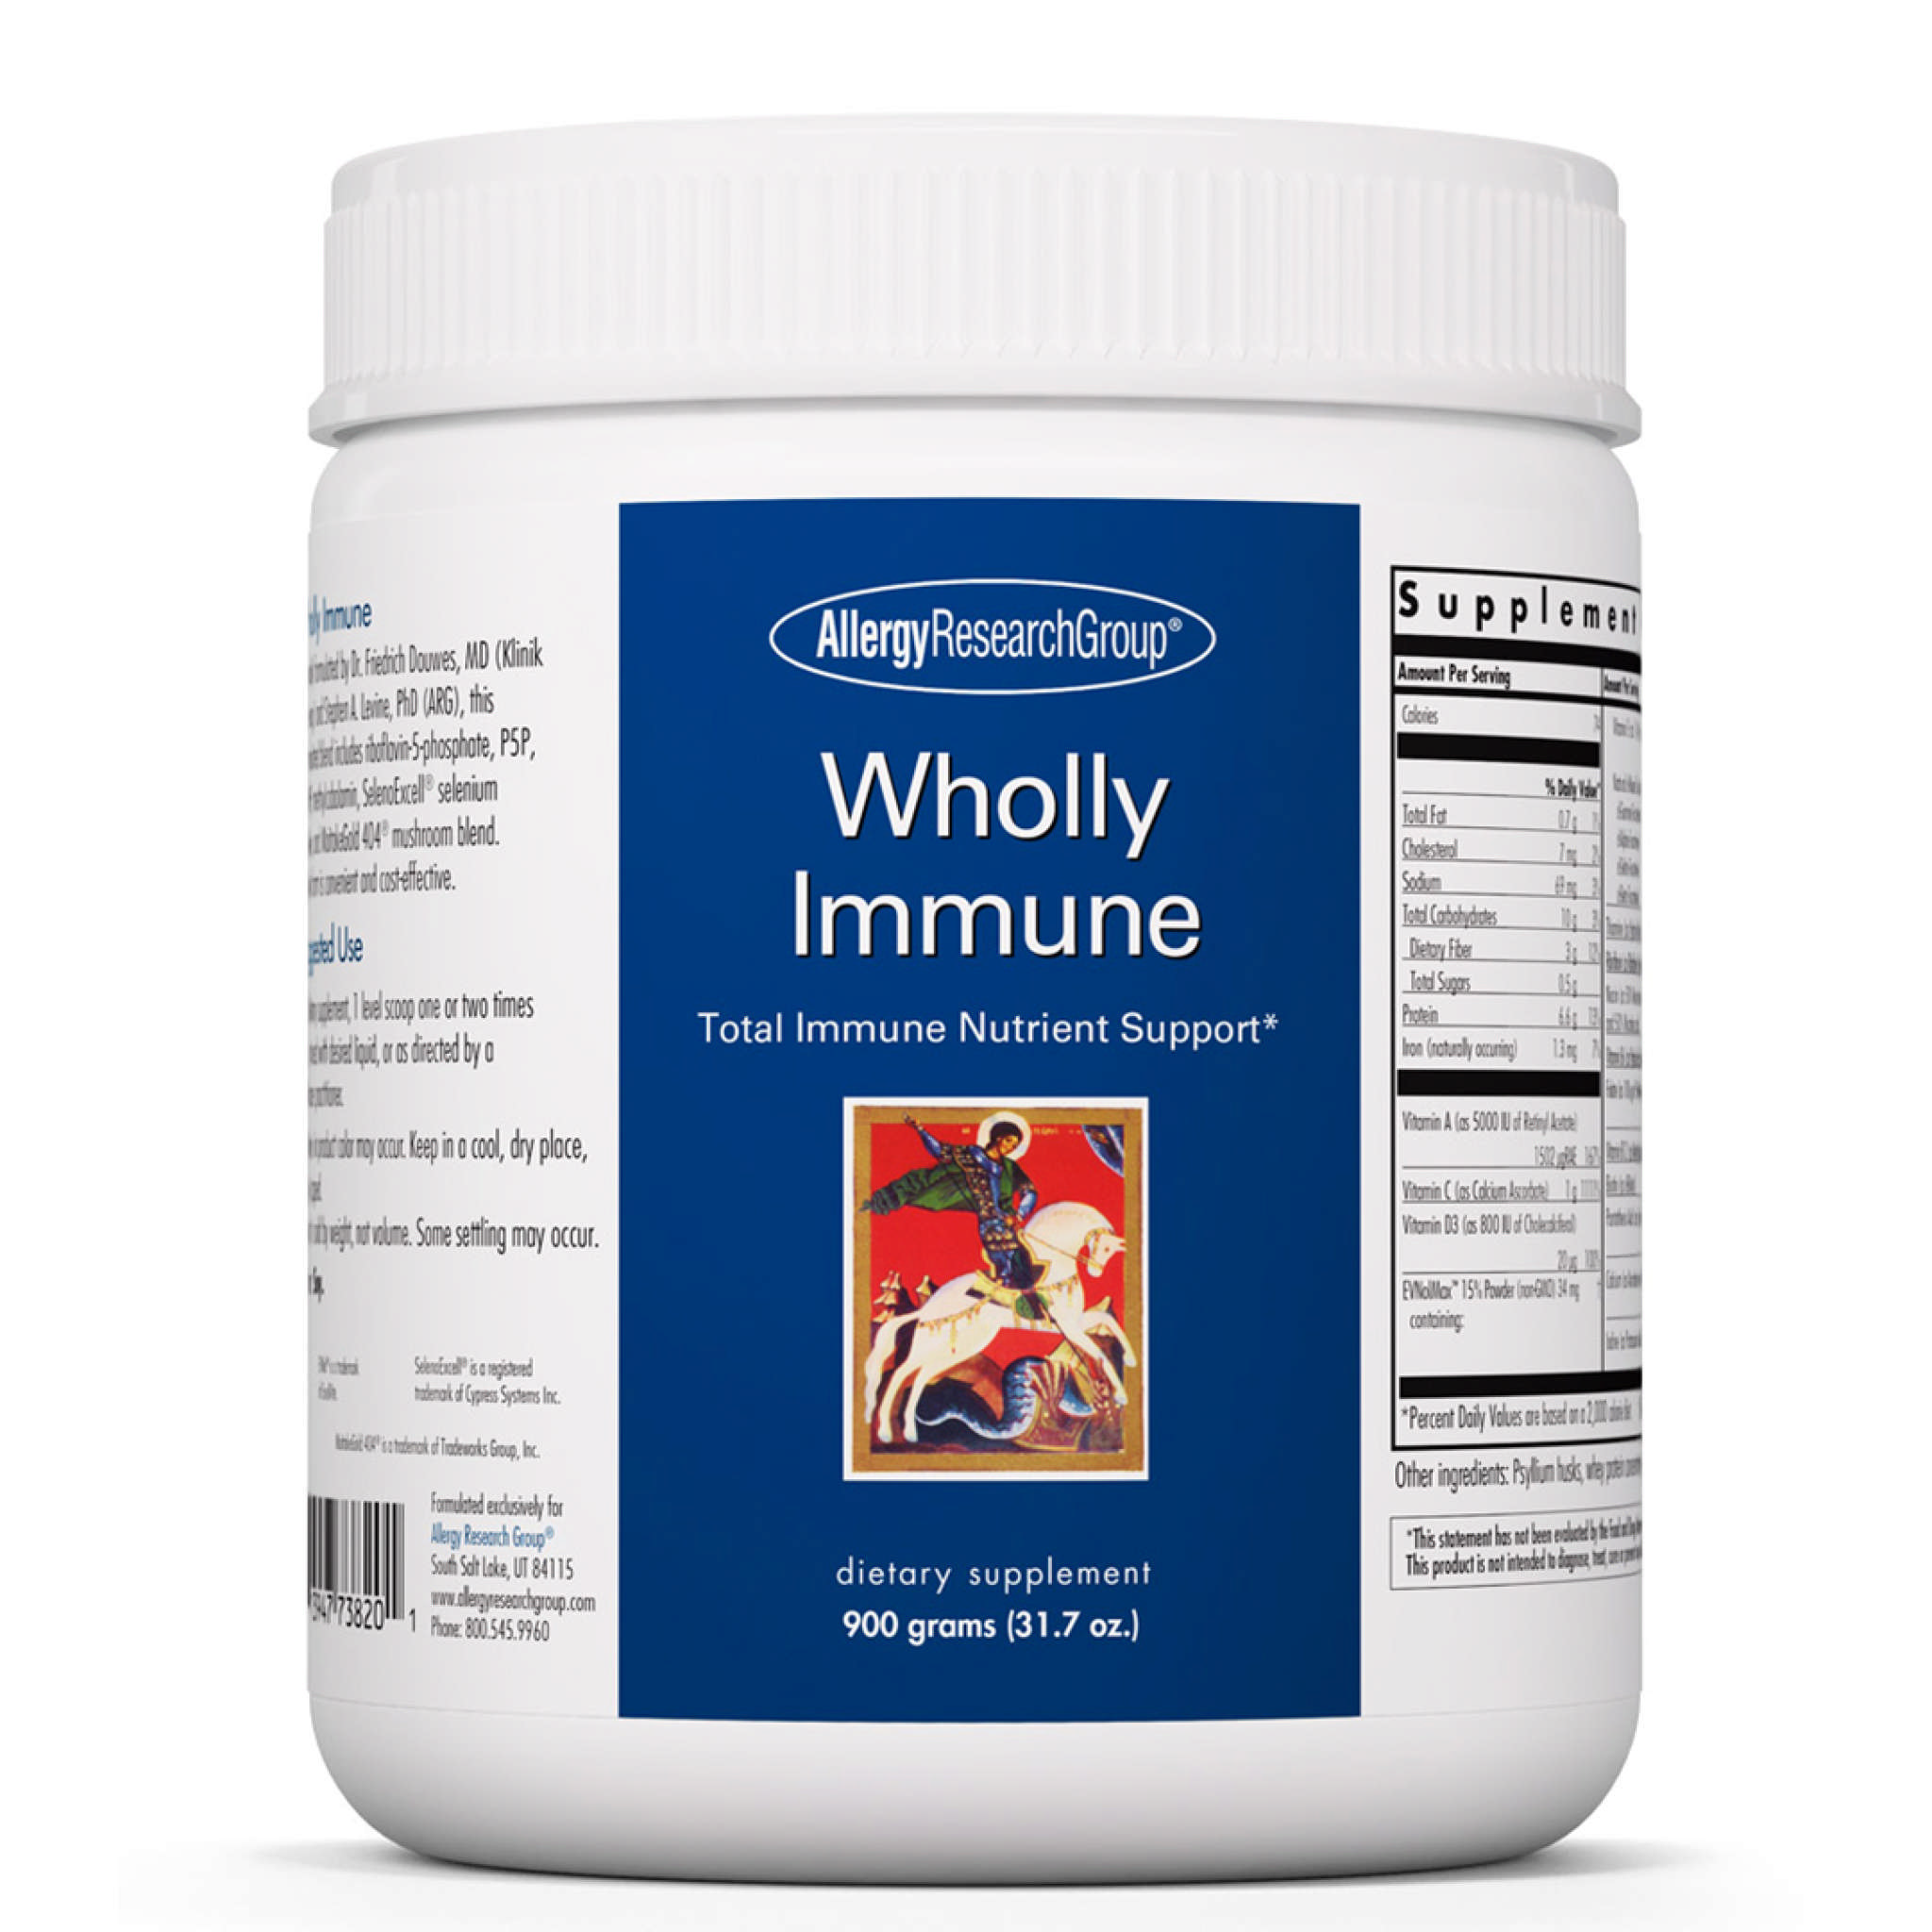 Allergy Research Group - Wholly Immune 900gms